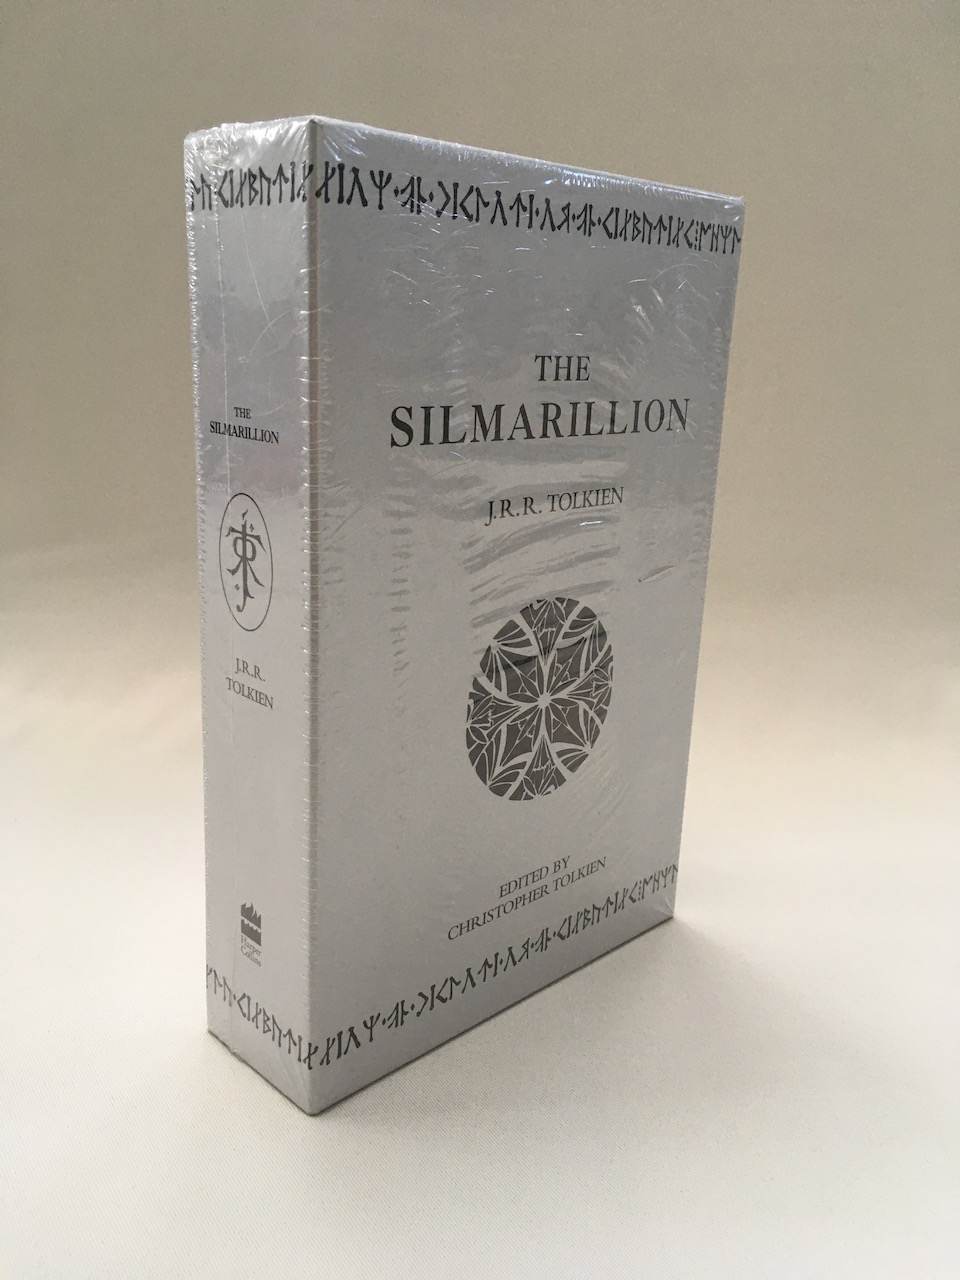 
The Silmarillion Limited Collector's Box 1